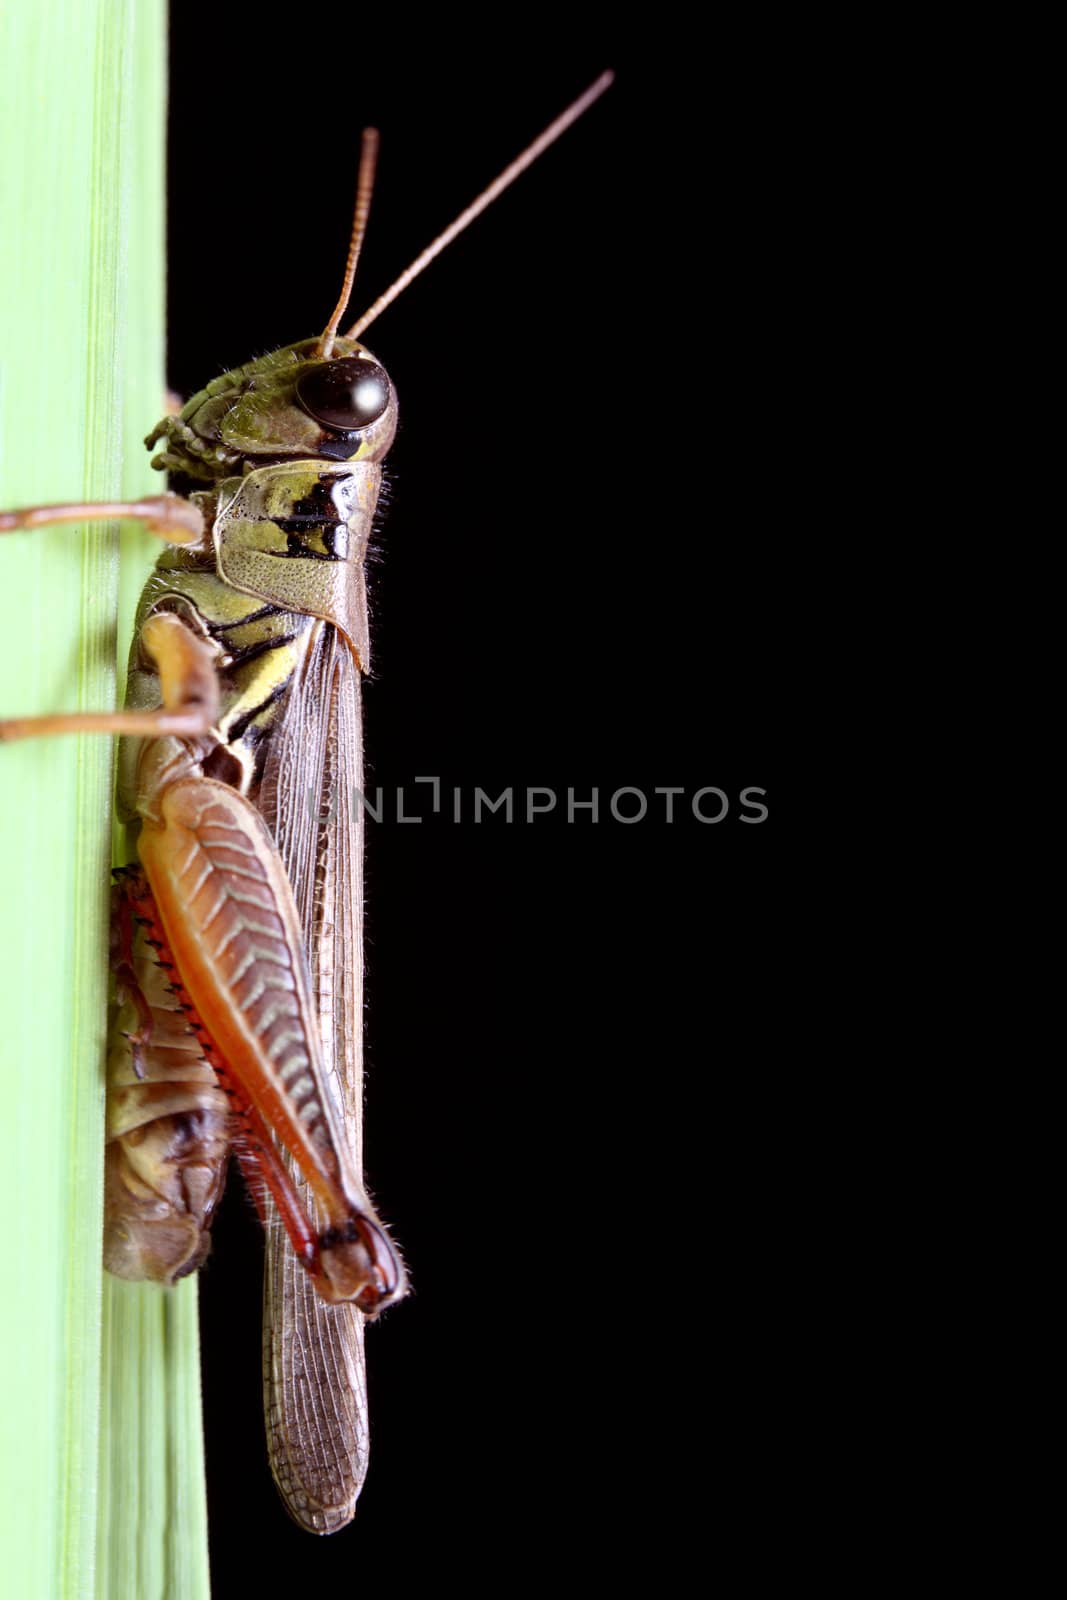 A macro shot of a grasshopper on a blade of grass against a solid black background.